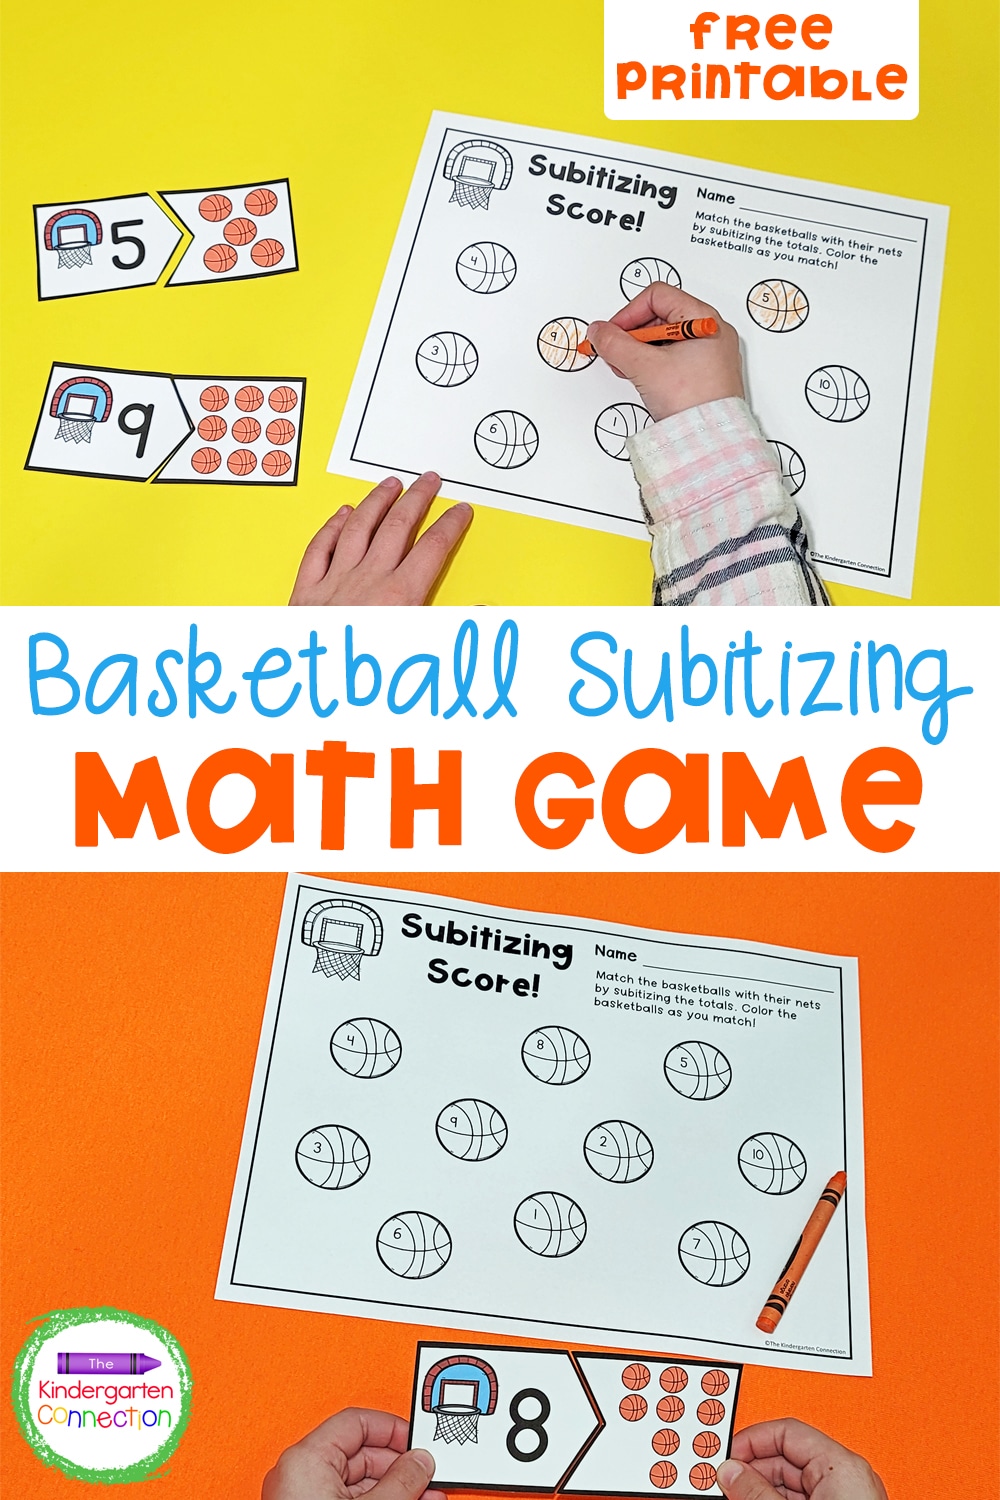 This free Basketball-Themed Subitizing Math Game will have your sports lovers cheering with excitement to work on important math skills!